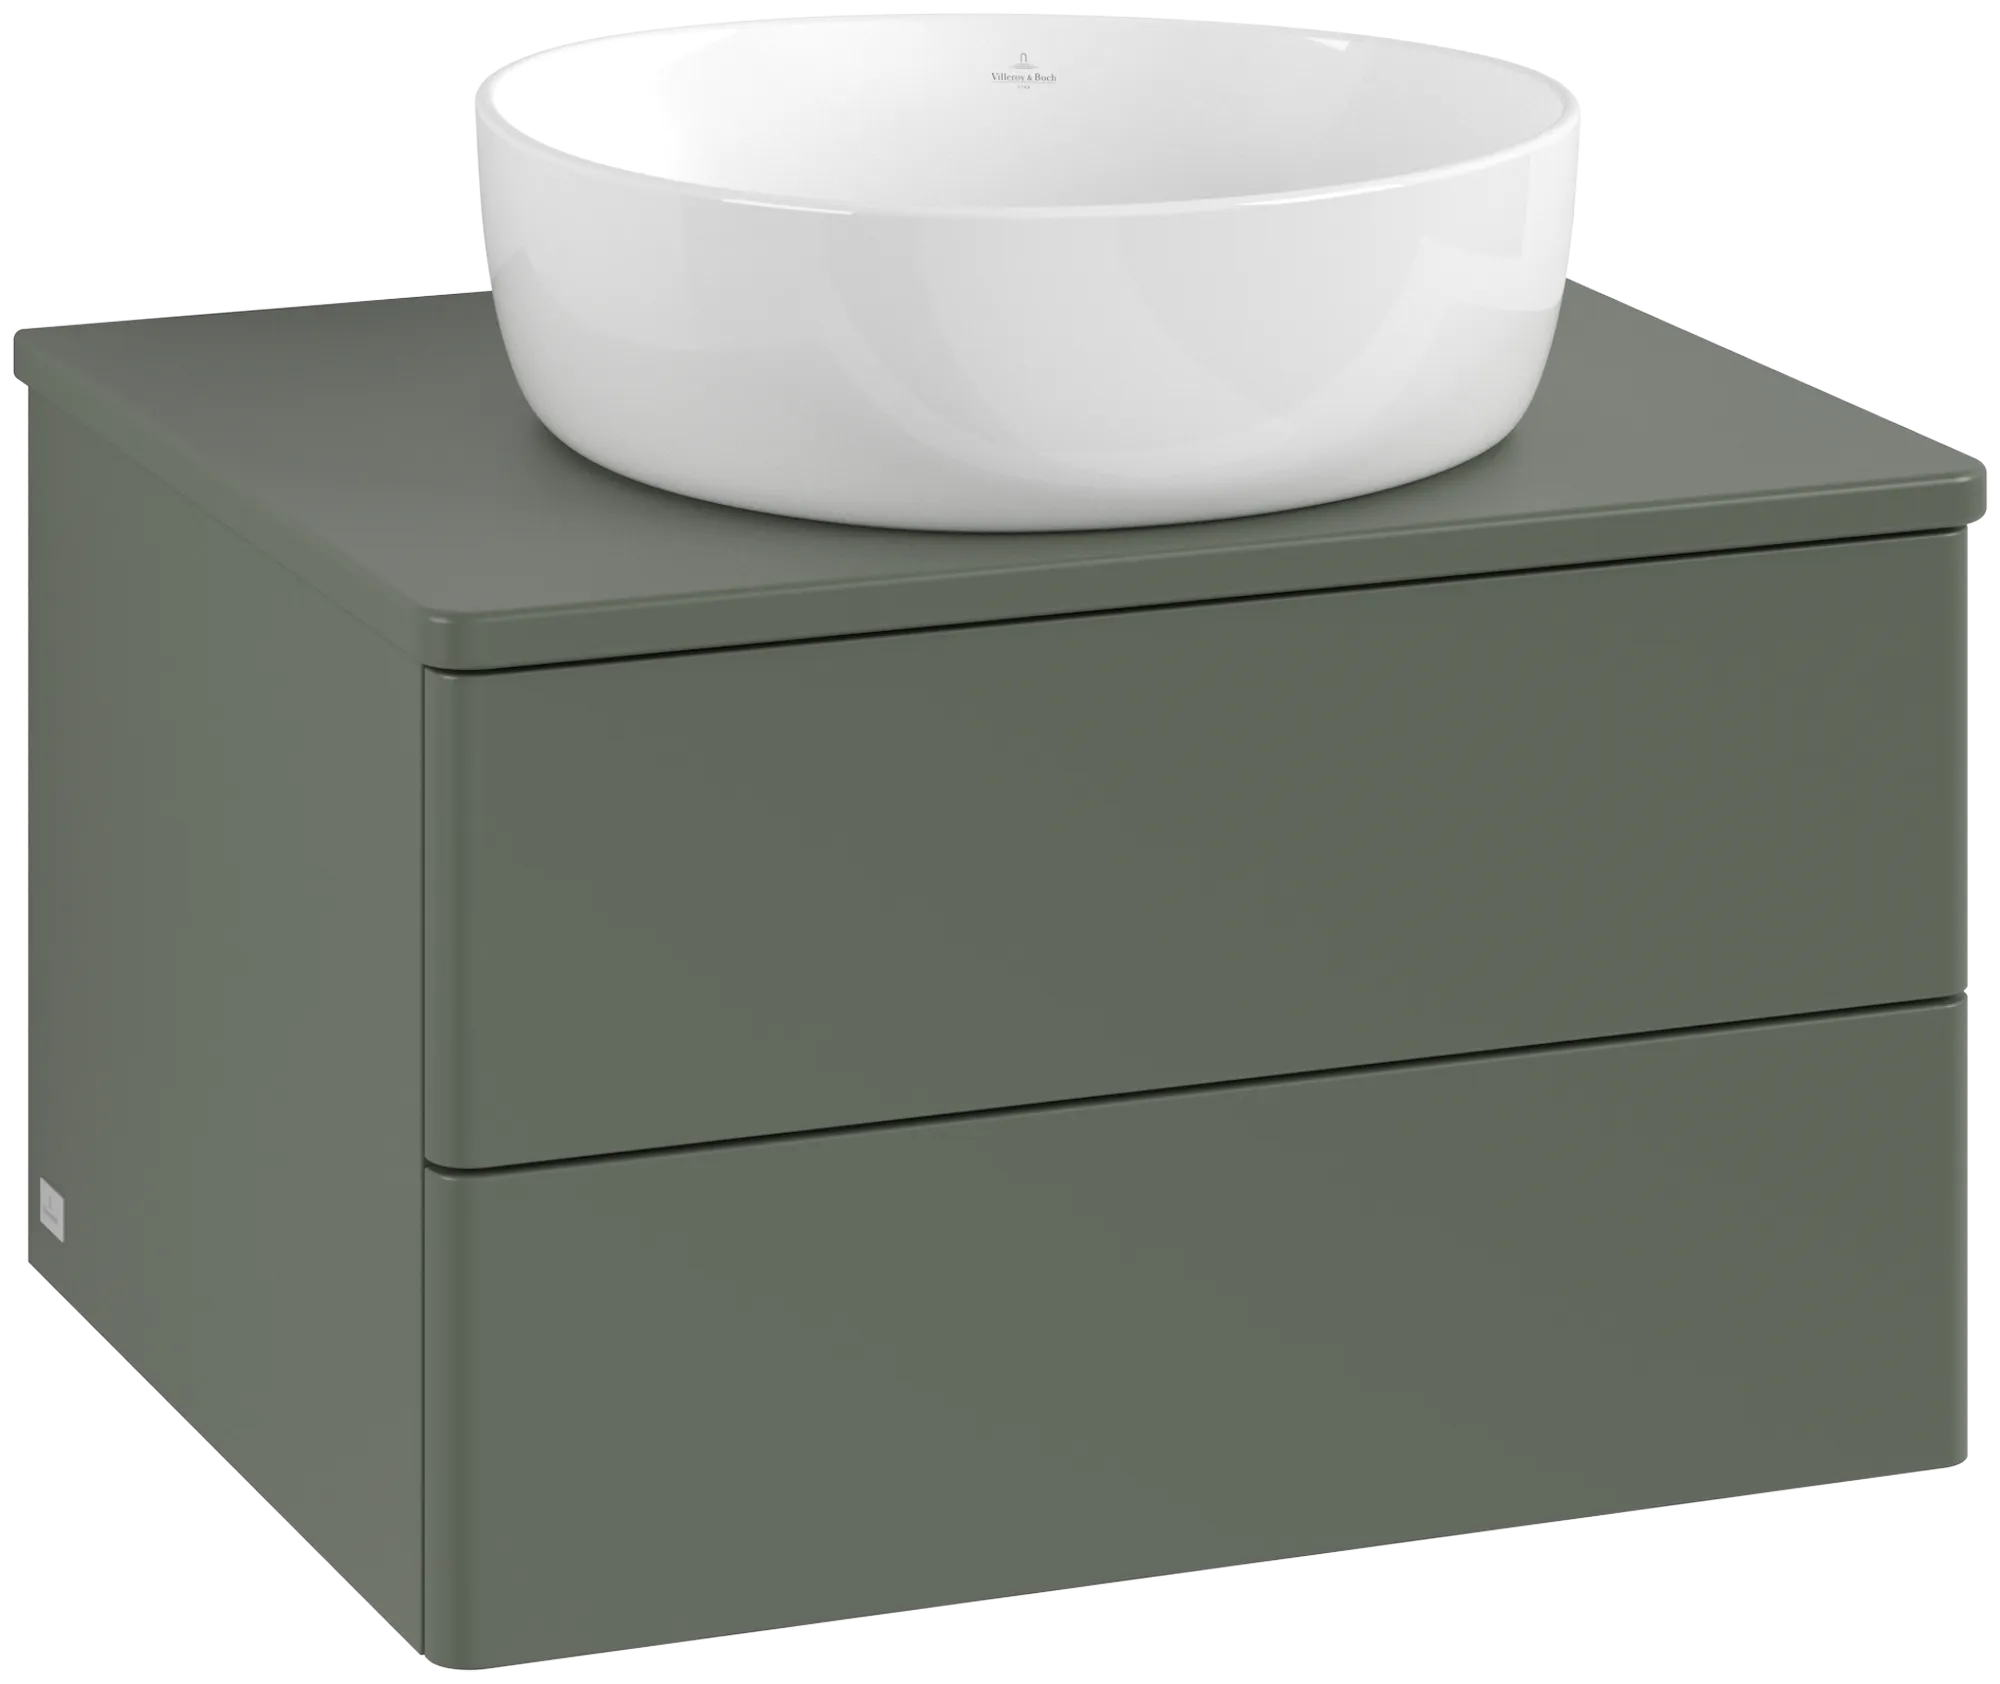 Picture of VILLEROY BOCH Antao Vanity unit, with lighting, 2 pull-out compartments, 600 x 360 x 500 mm, Front without structure, Leaf Green Matt Lacquer / Leaf Green Matt Lacquer #L18010HL